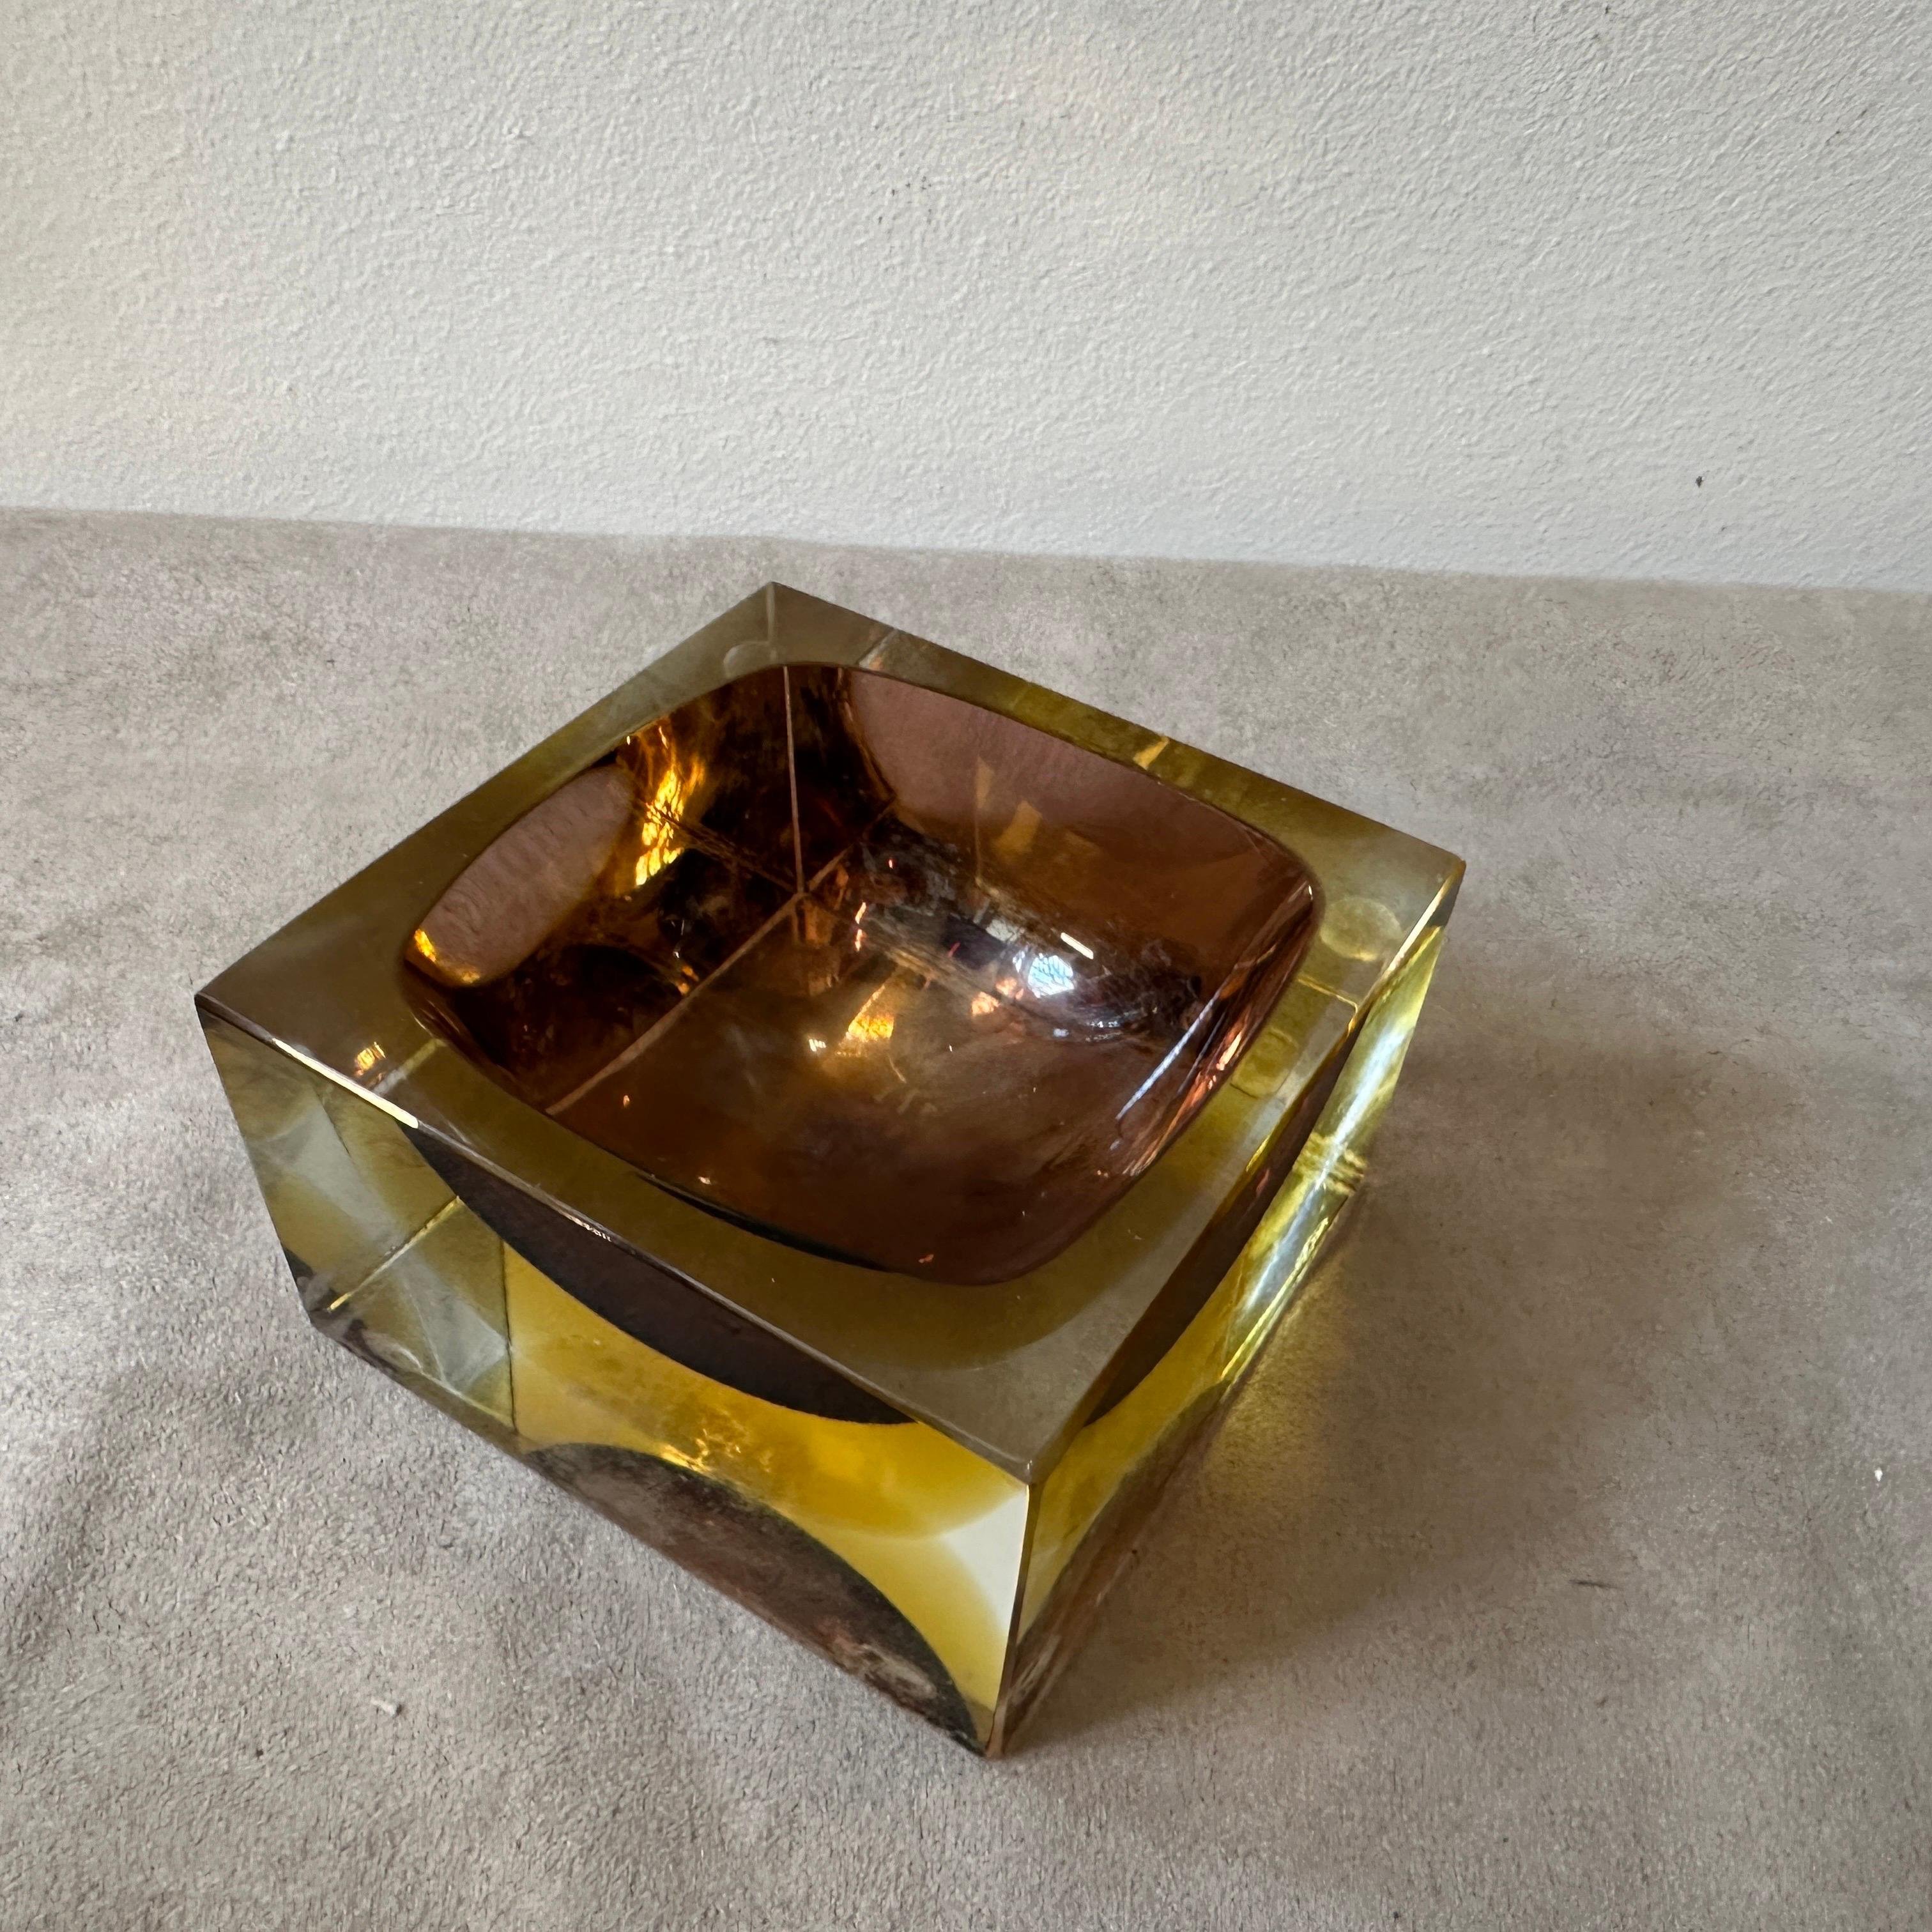 1970s Modernist Yellow and Brown Sommerso Murano Glass Ashtray by Mandruzzato For Sale 3